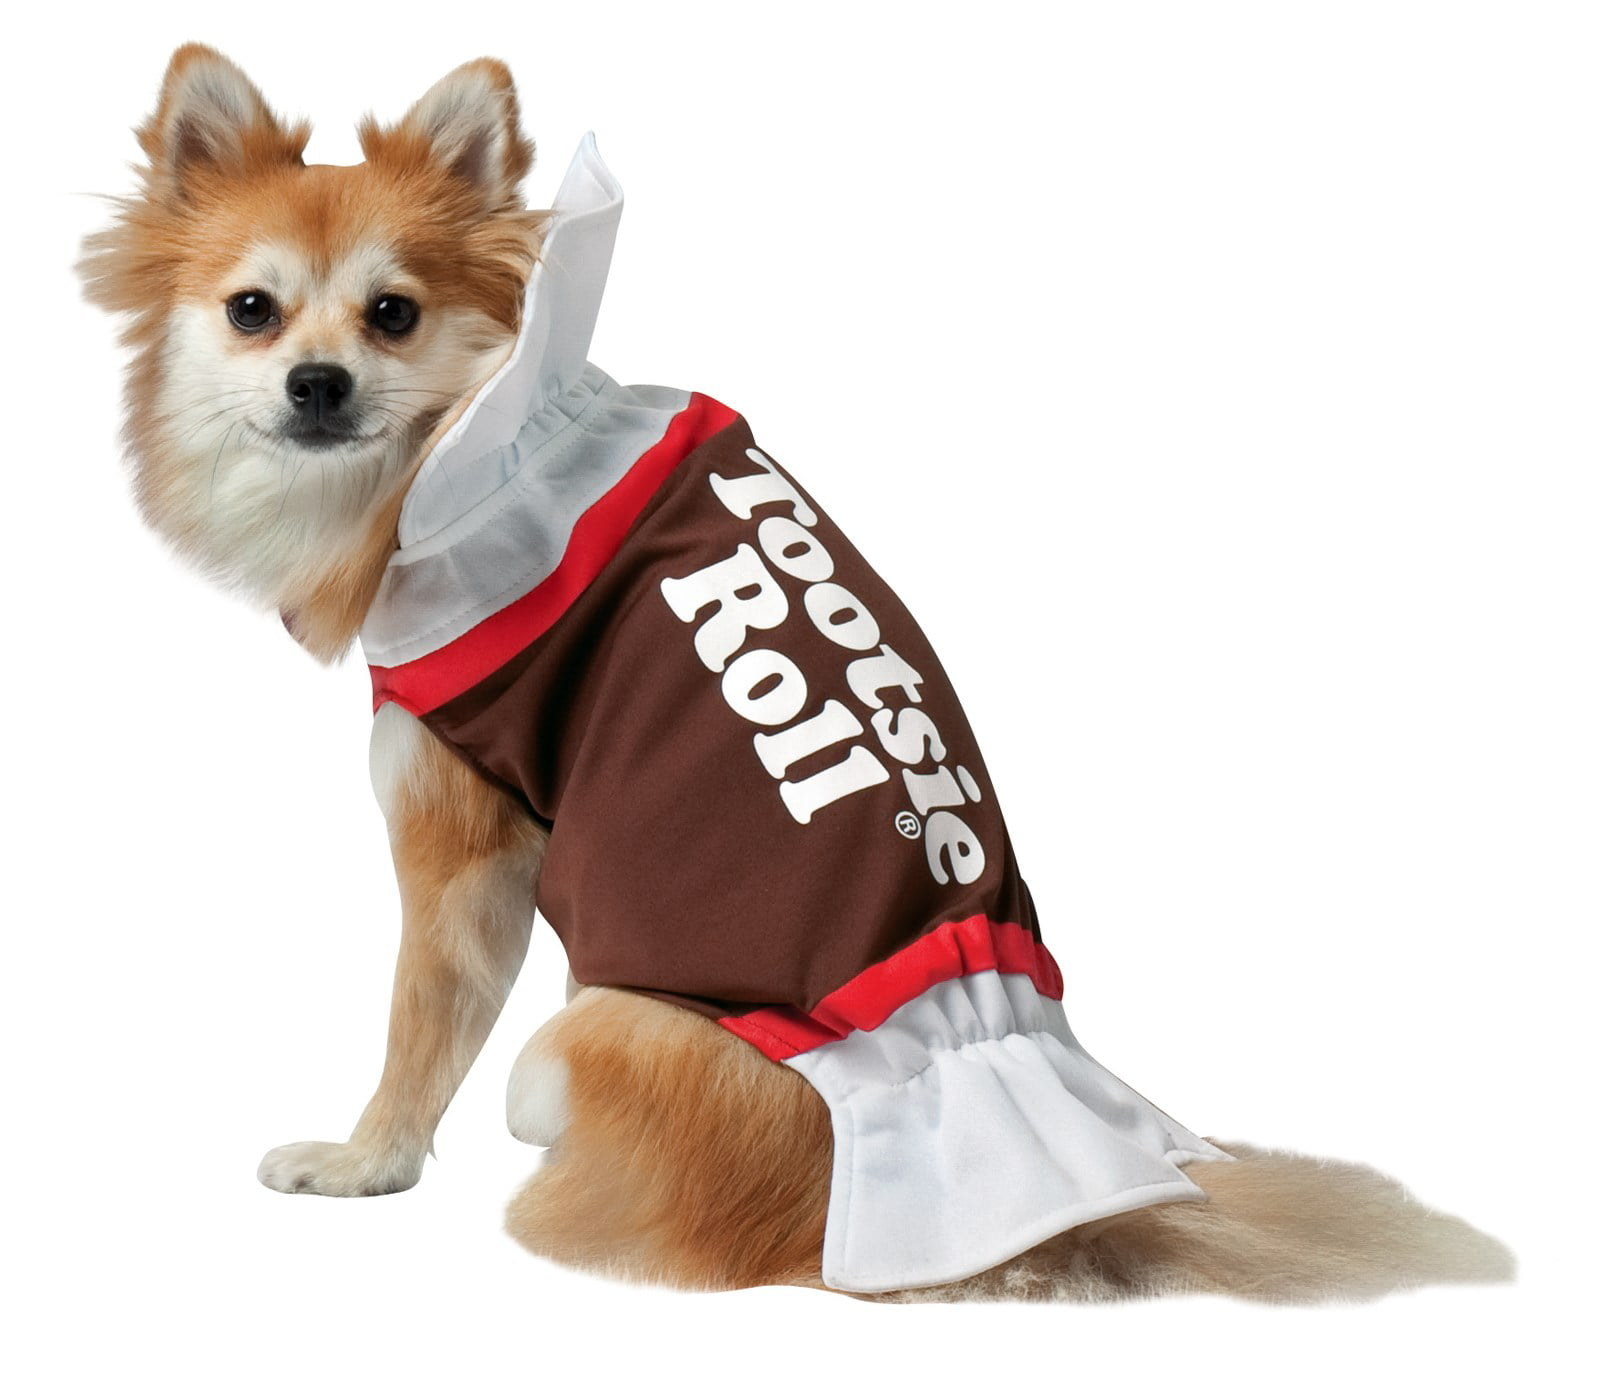 small dog wearing the tootsie roll costume